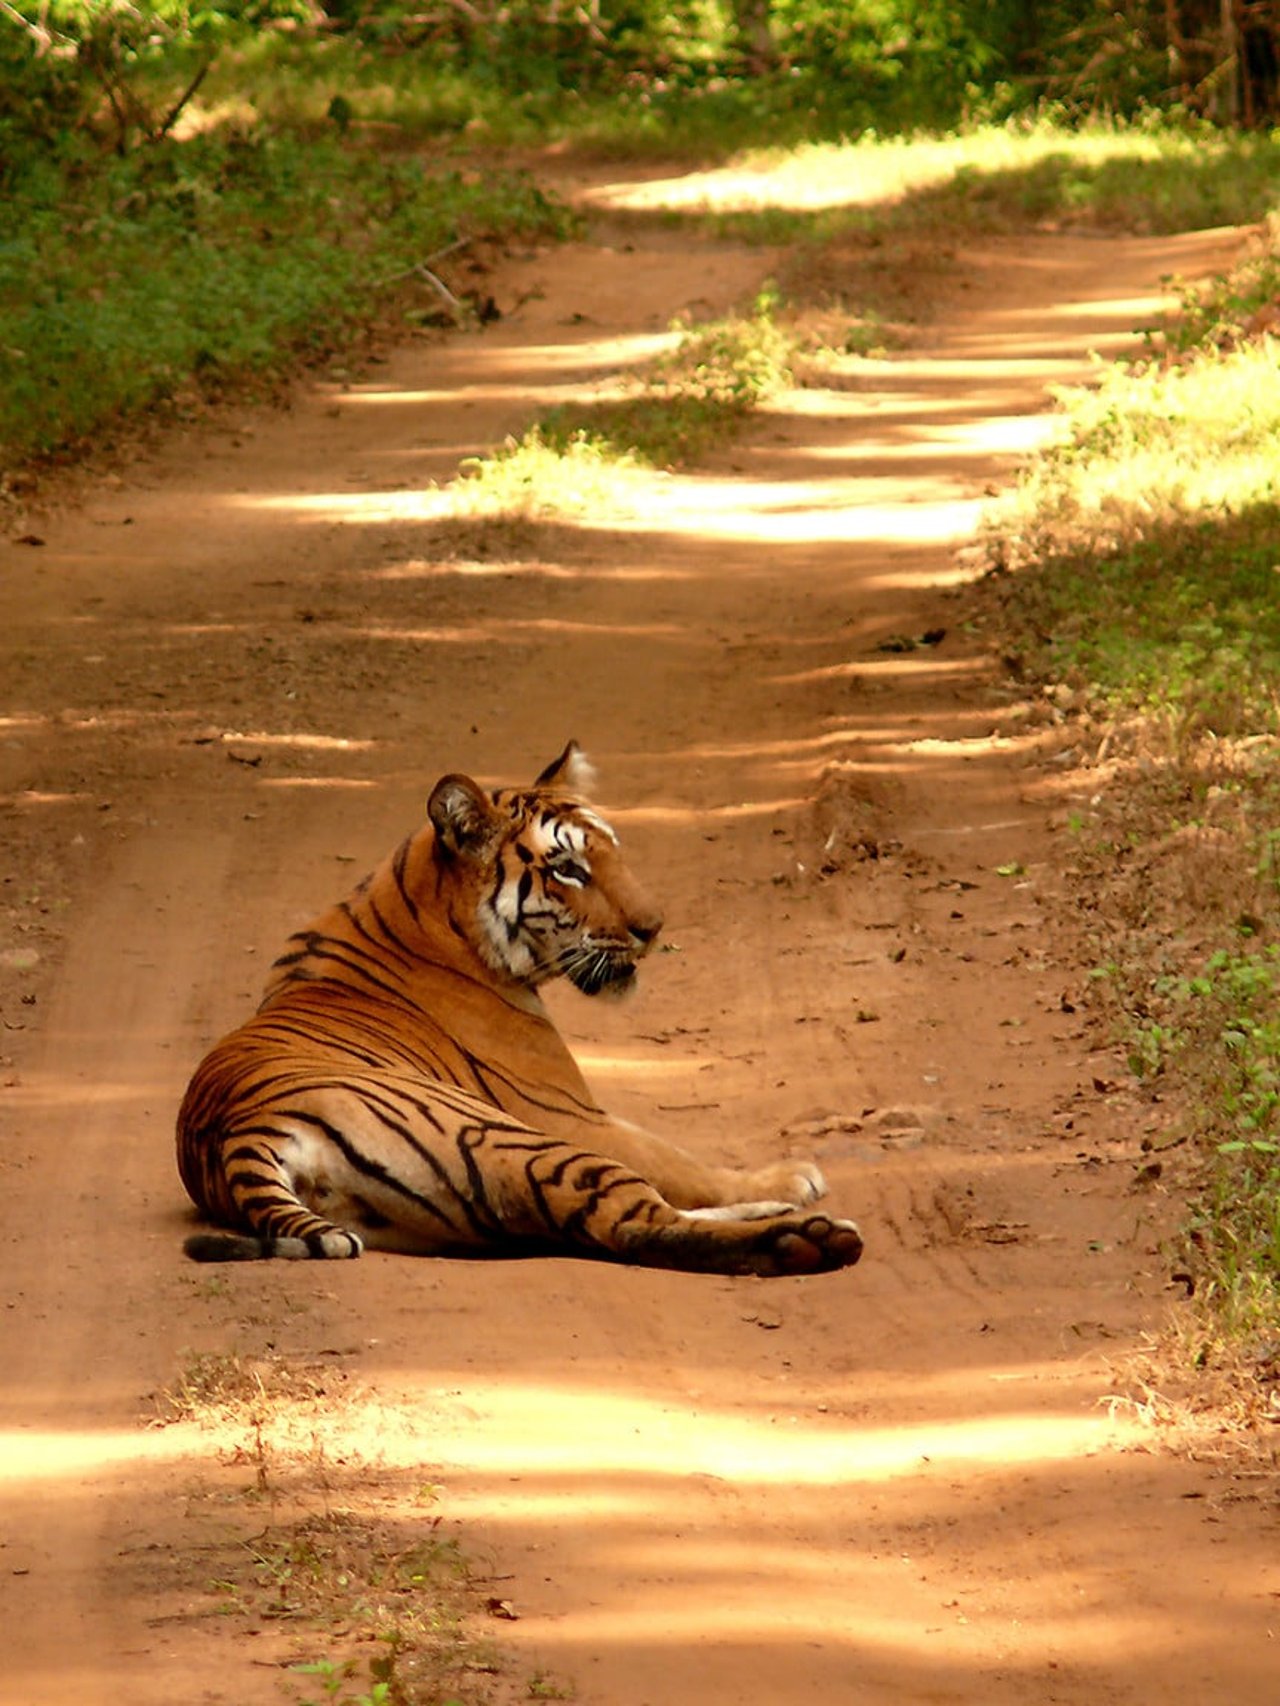 Tiger picture in Navegaon Nagzira Tiger Reserve by Heerak Nandy picture 2